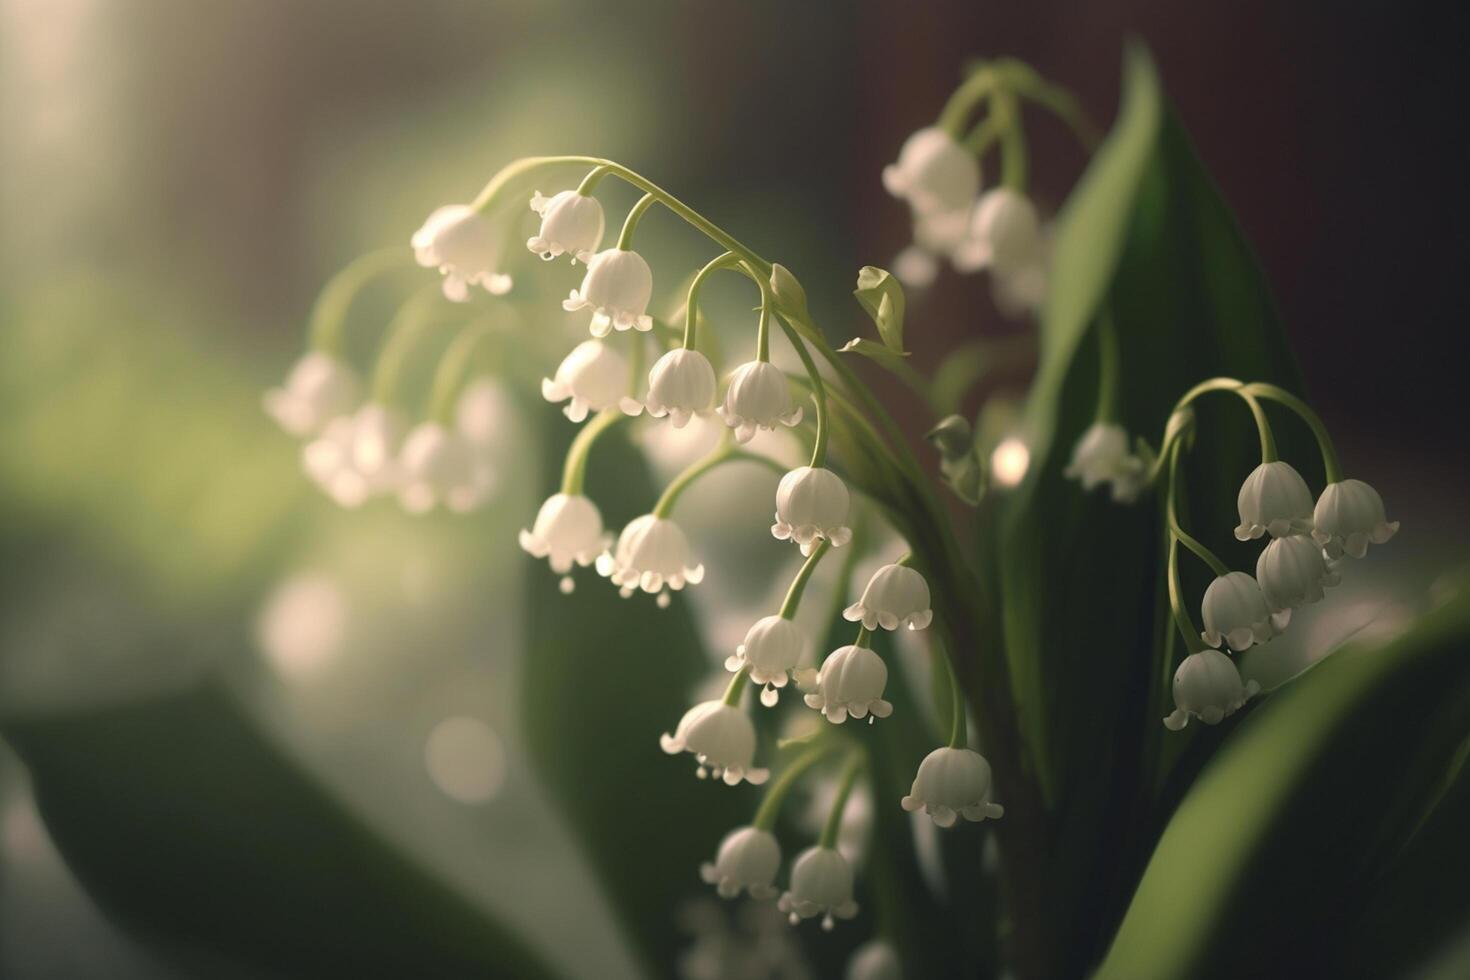 Beautiful Lily of the Valley Close-up with Fresh Green Bokeh photo